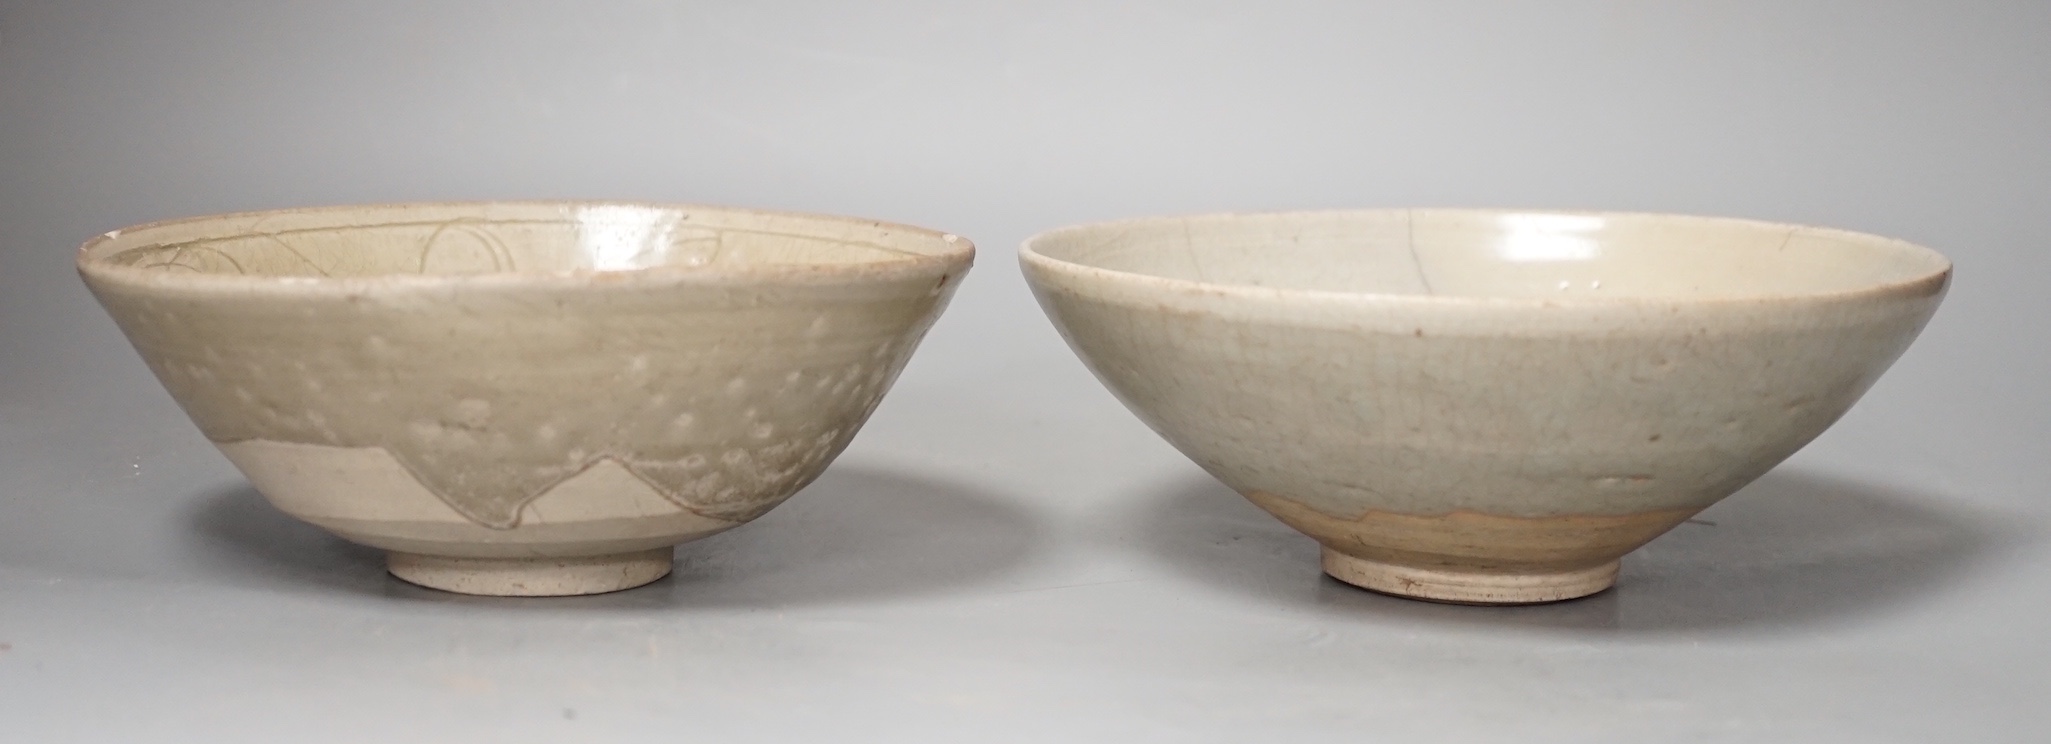 Two Chinese celadon bowls, Song Dynasty, largest 19cm